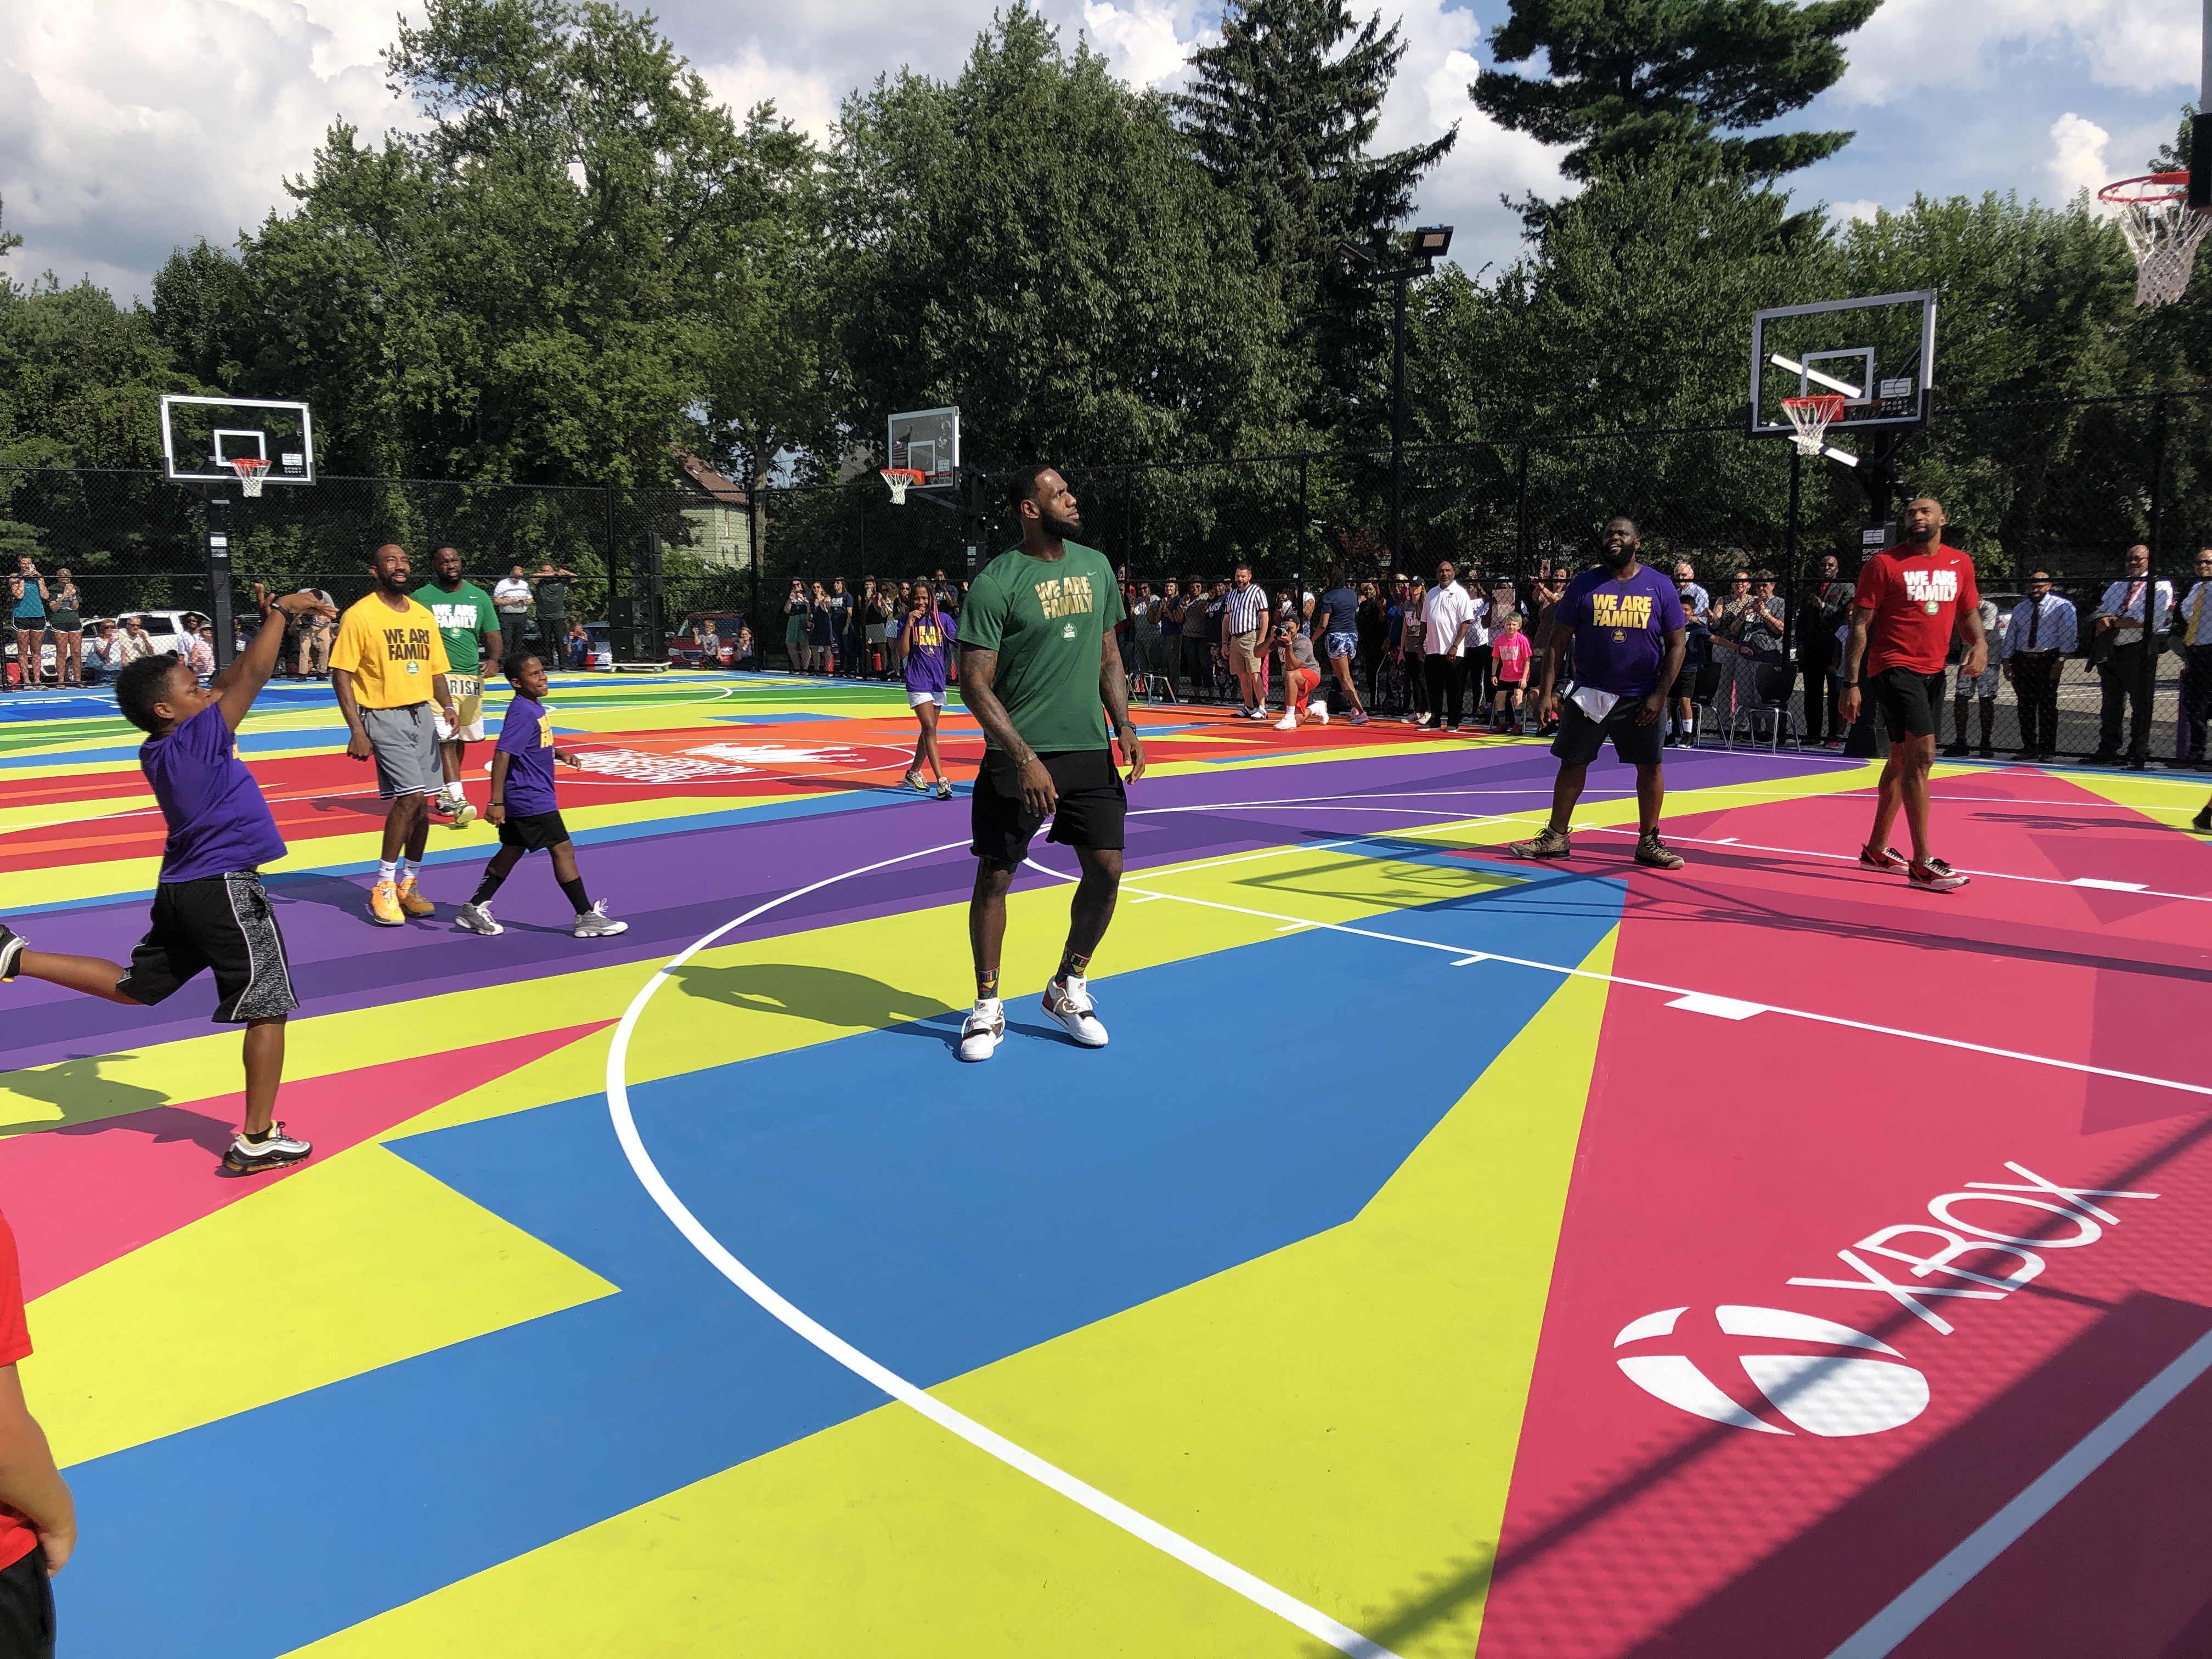 Xbox and 2K Build One-of-a-Kind Basketball Court at I Promise School in Akron